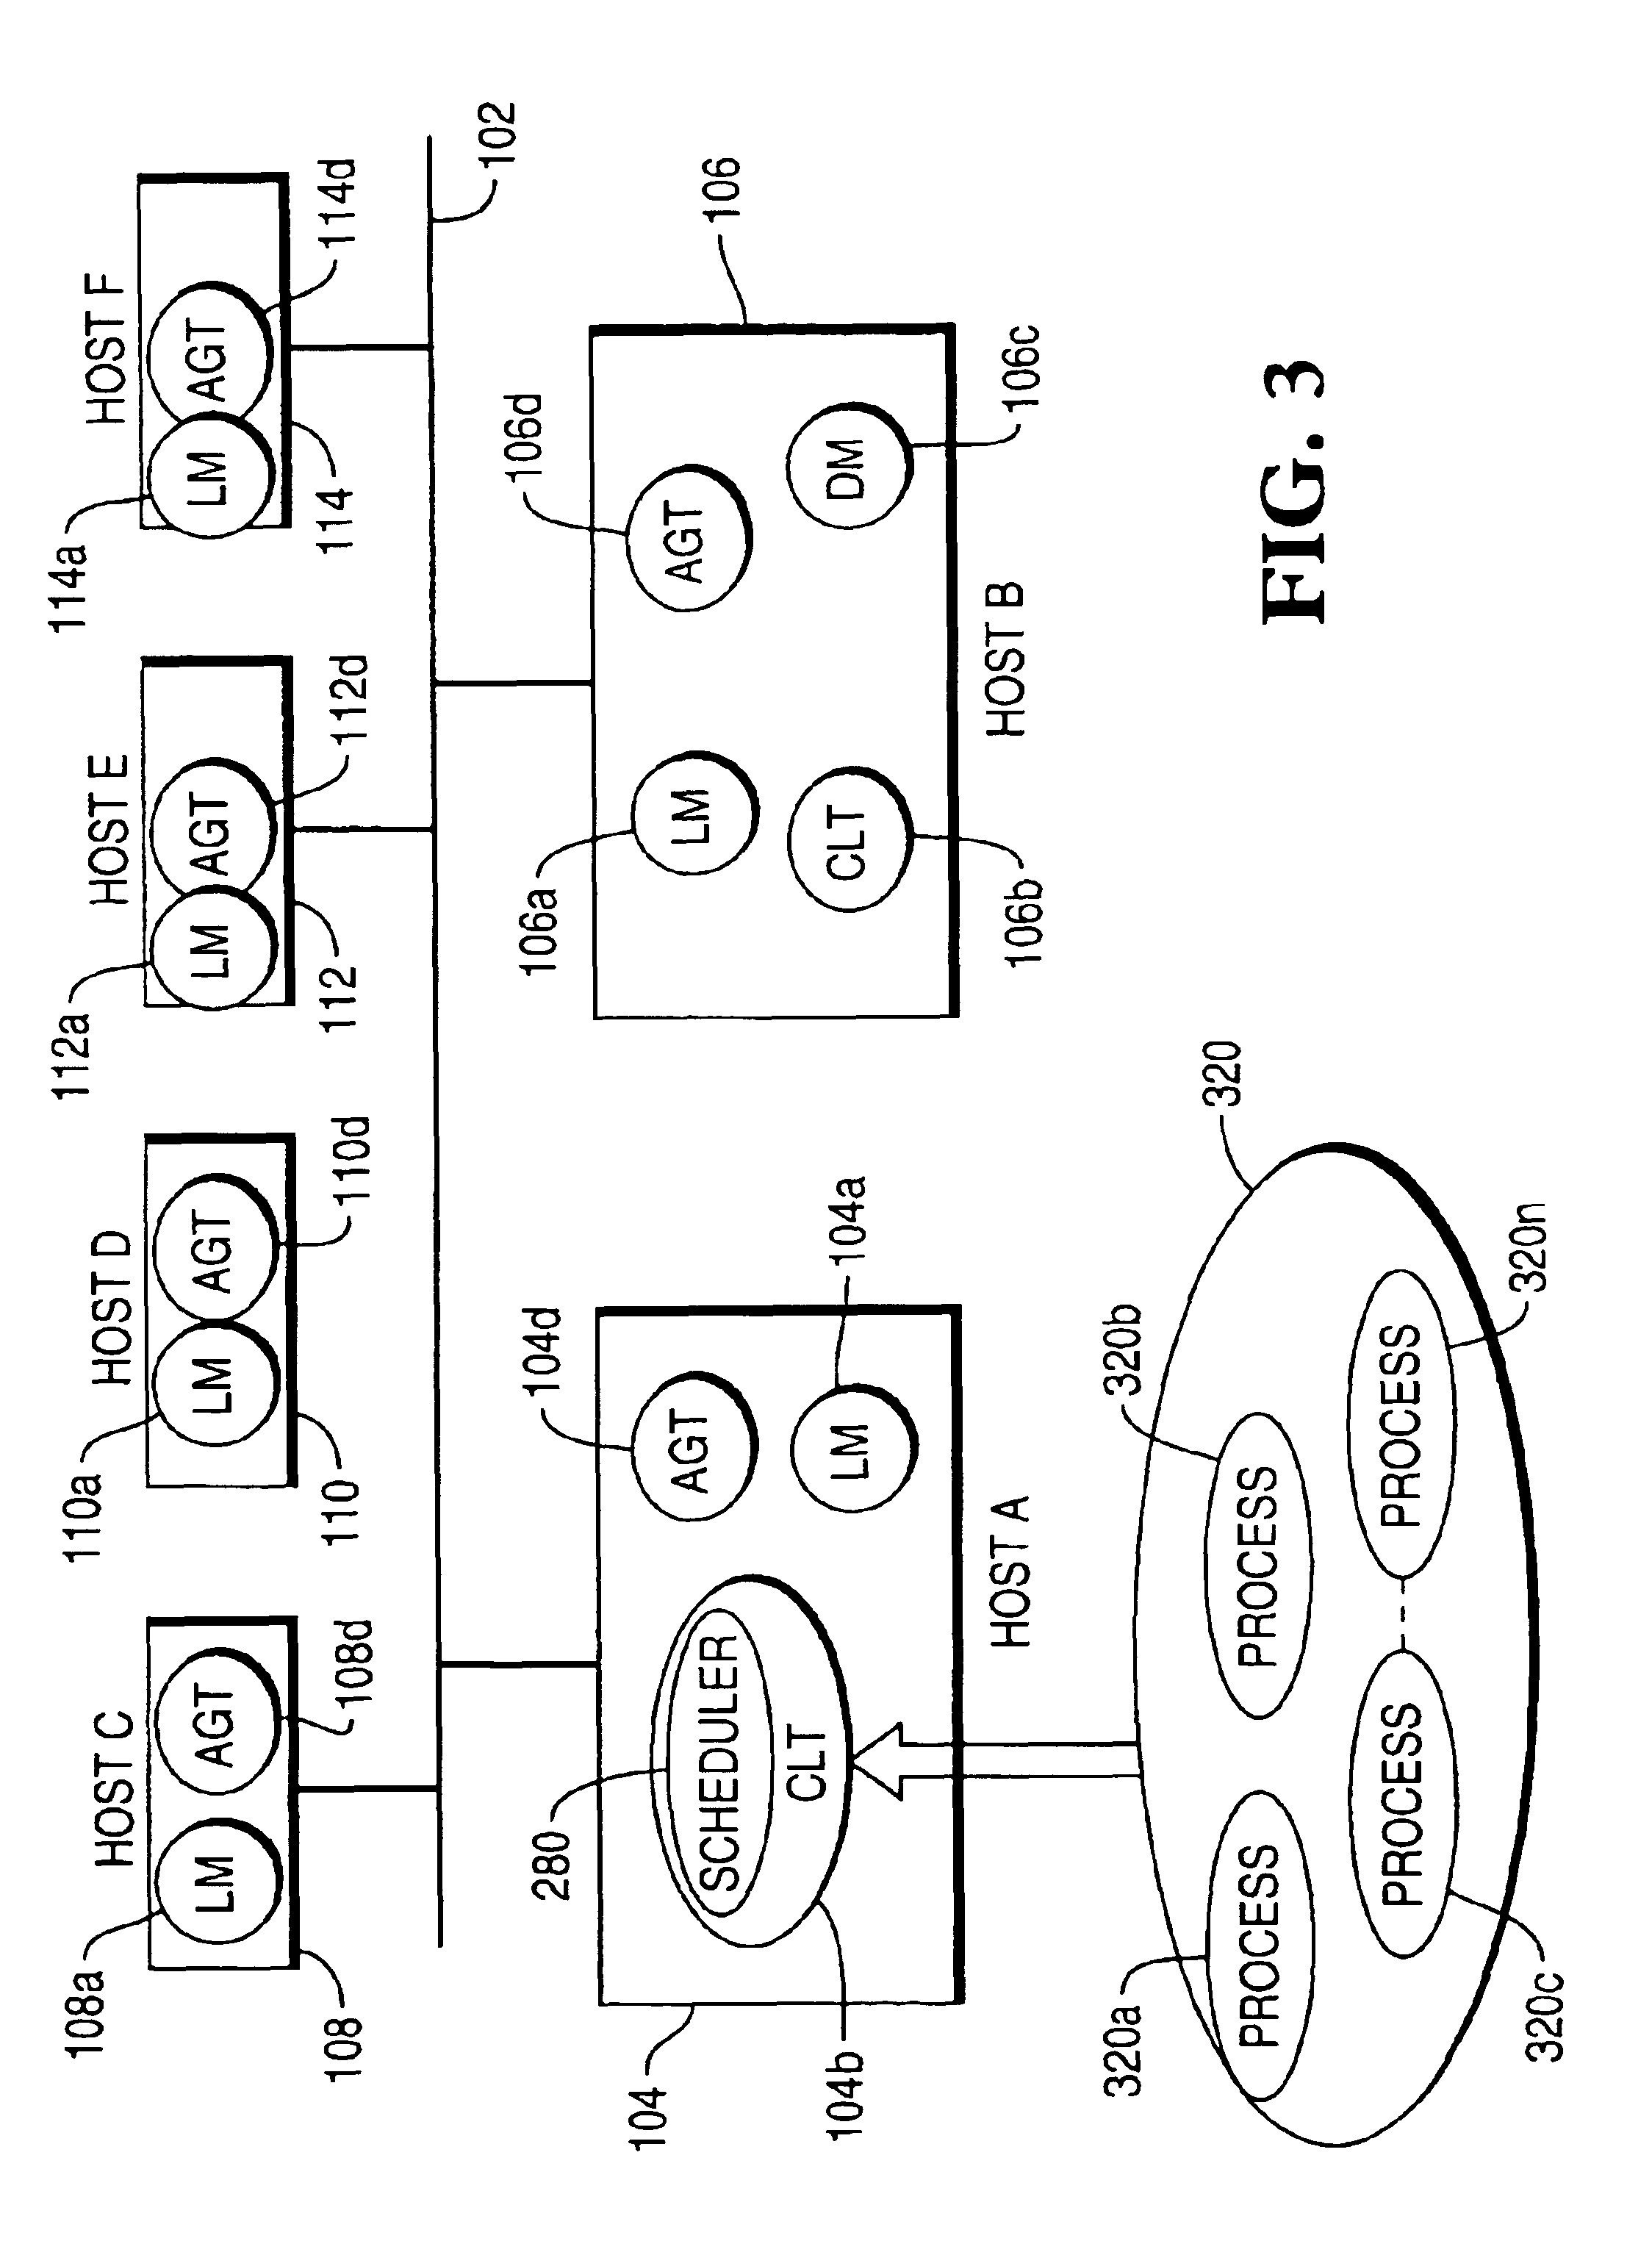 Method and apparatus for allocating network resources and changing the allocation based on dynamic workload changes